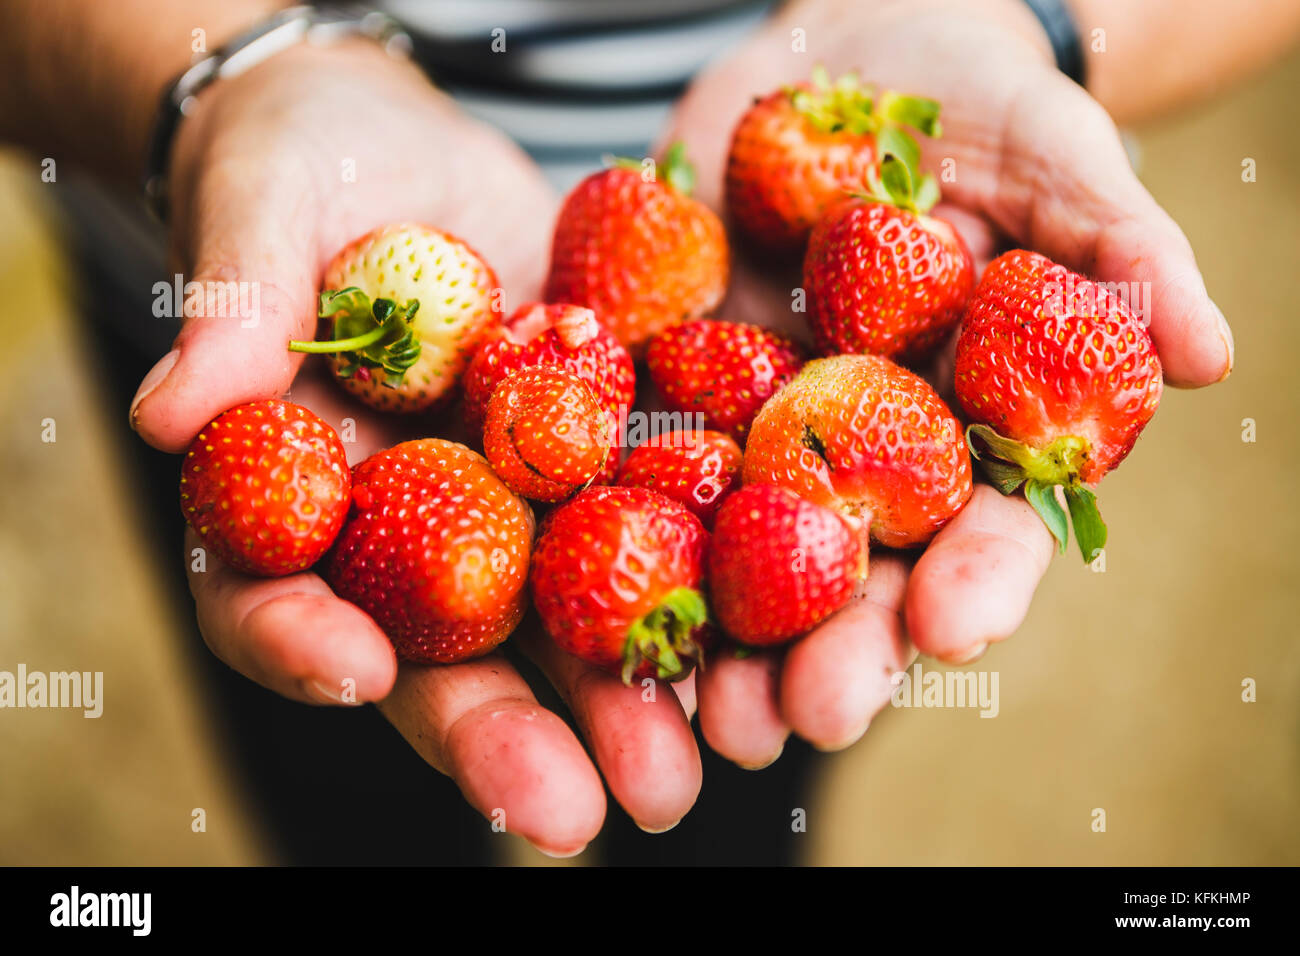 Old woman holding strawberries on her hands Stock Photo